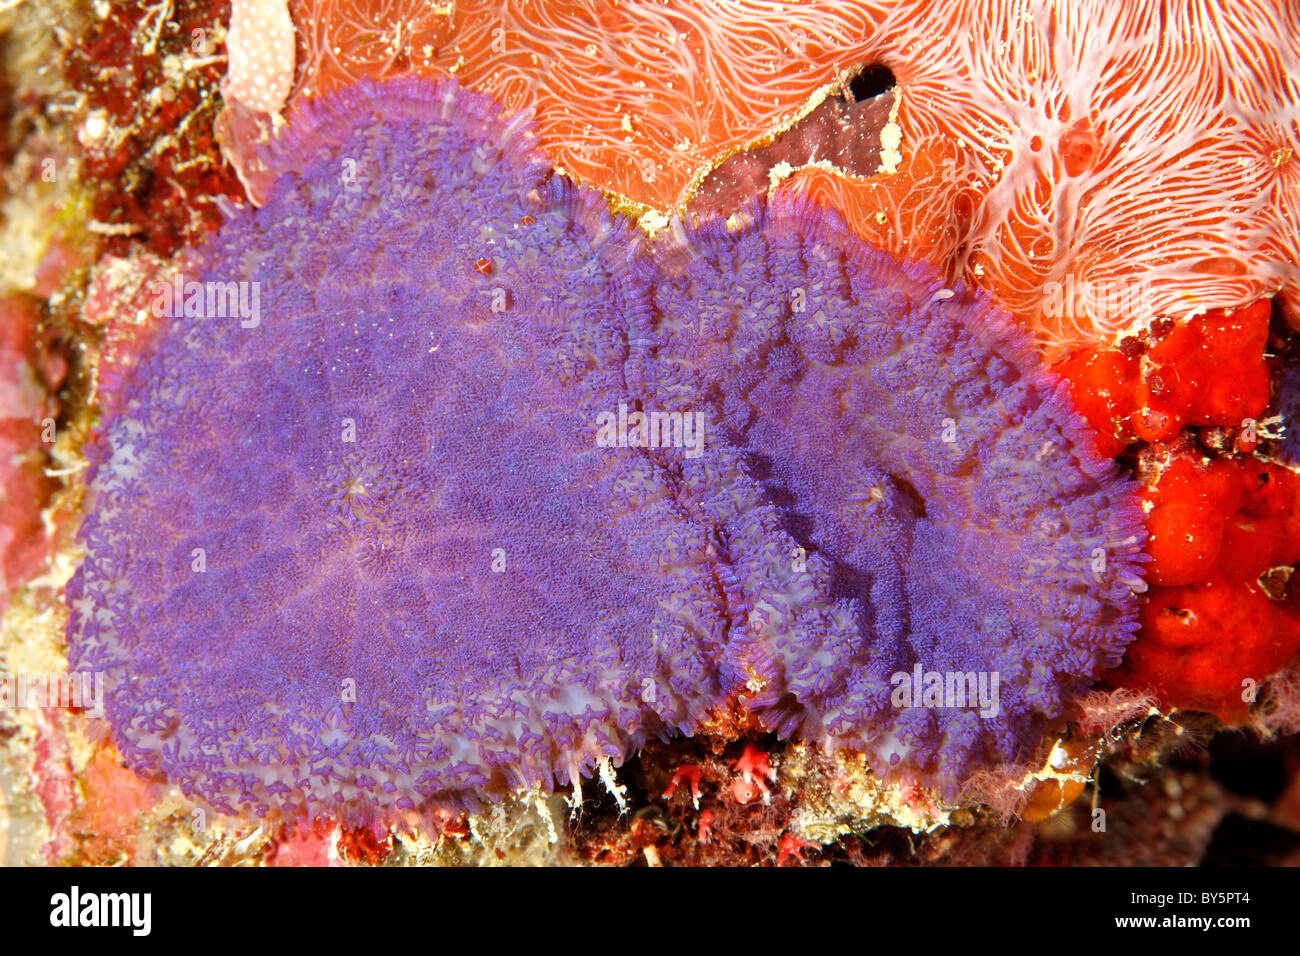 Purple Corallimorphs, also known as Mushroom corals, Discosoma or Actinodiscus sp. Stock Photo